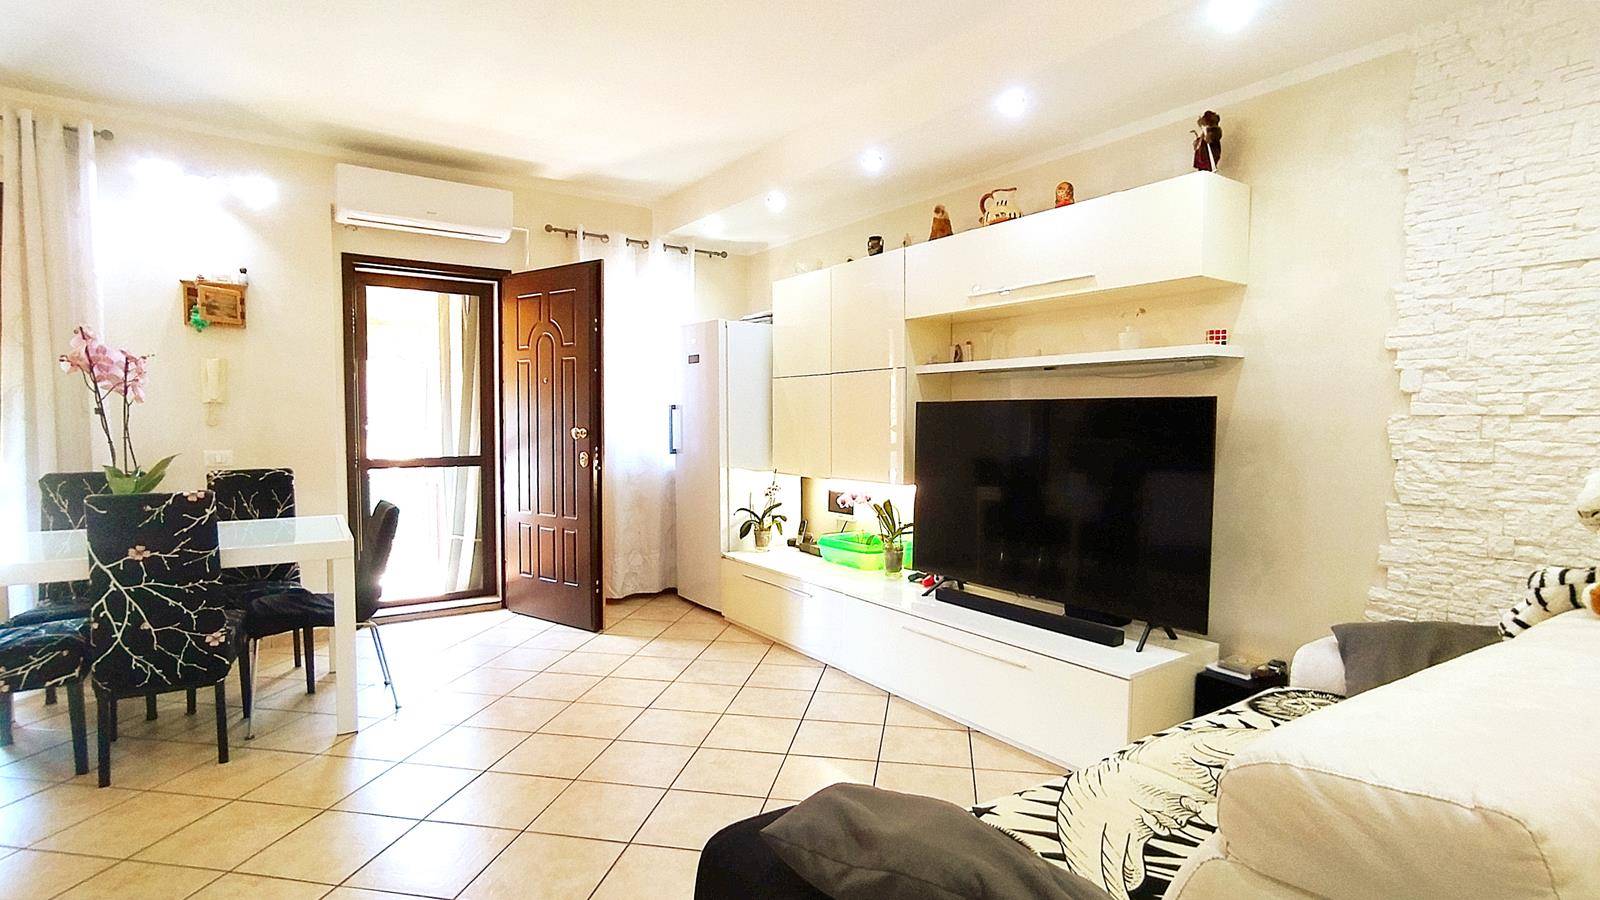 BARACCHE DI SAN POLO (BORGONUOVO), TARANO, Apartment for sale of 72 Sq. mt., Excellent Condition, Heating Individual heating system, Energetic class: 